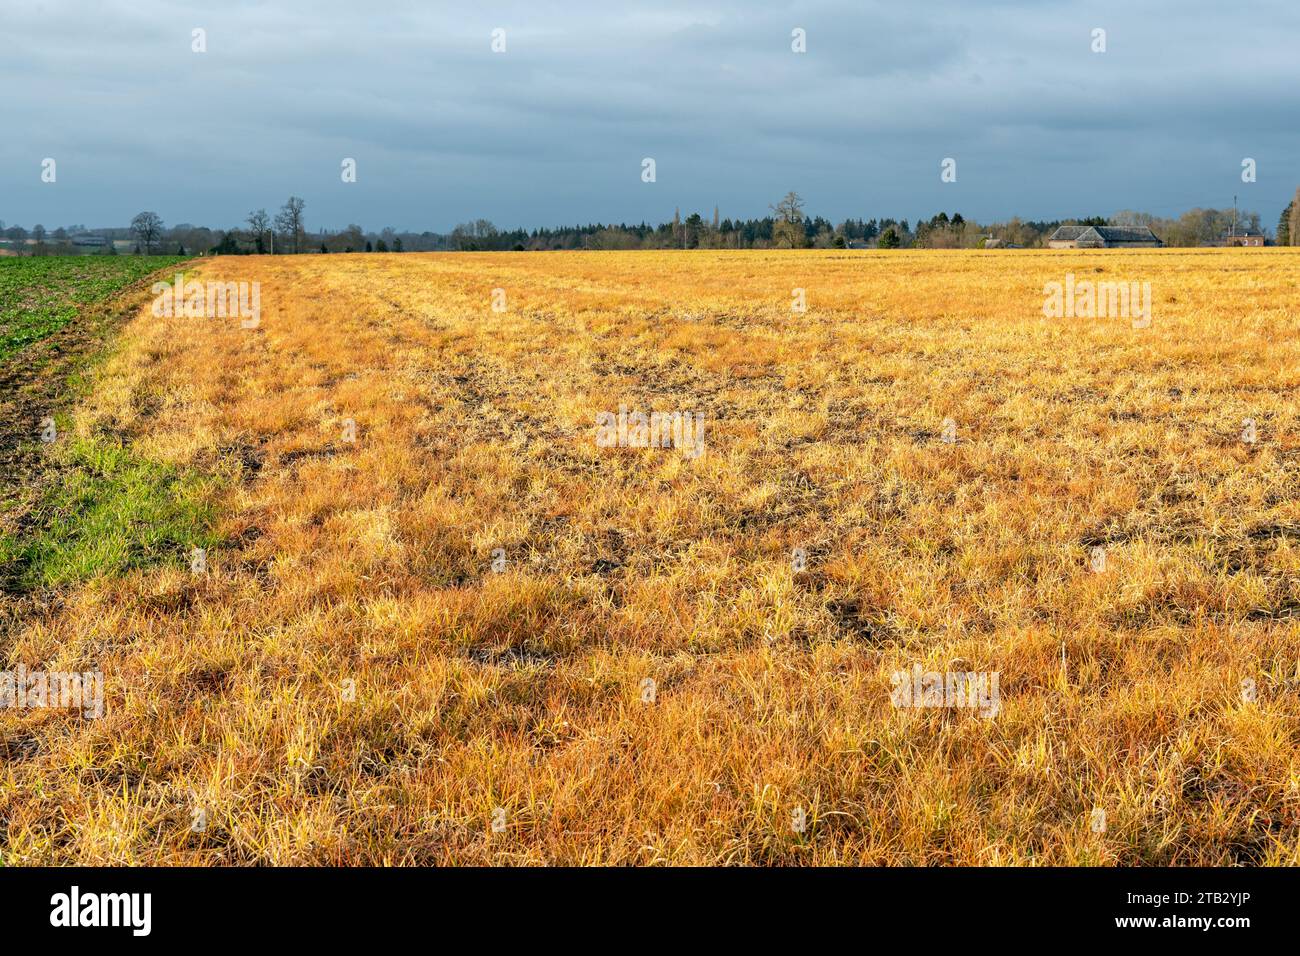 Field with orange vegetation after application of glyphosate weedkiller Stock Photo